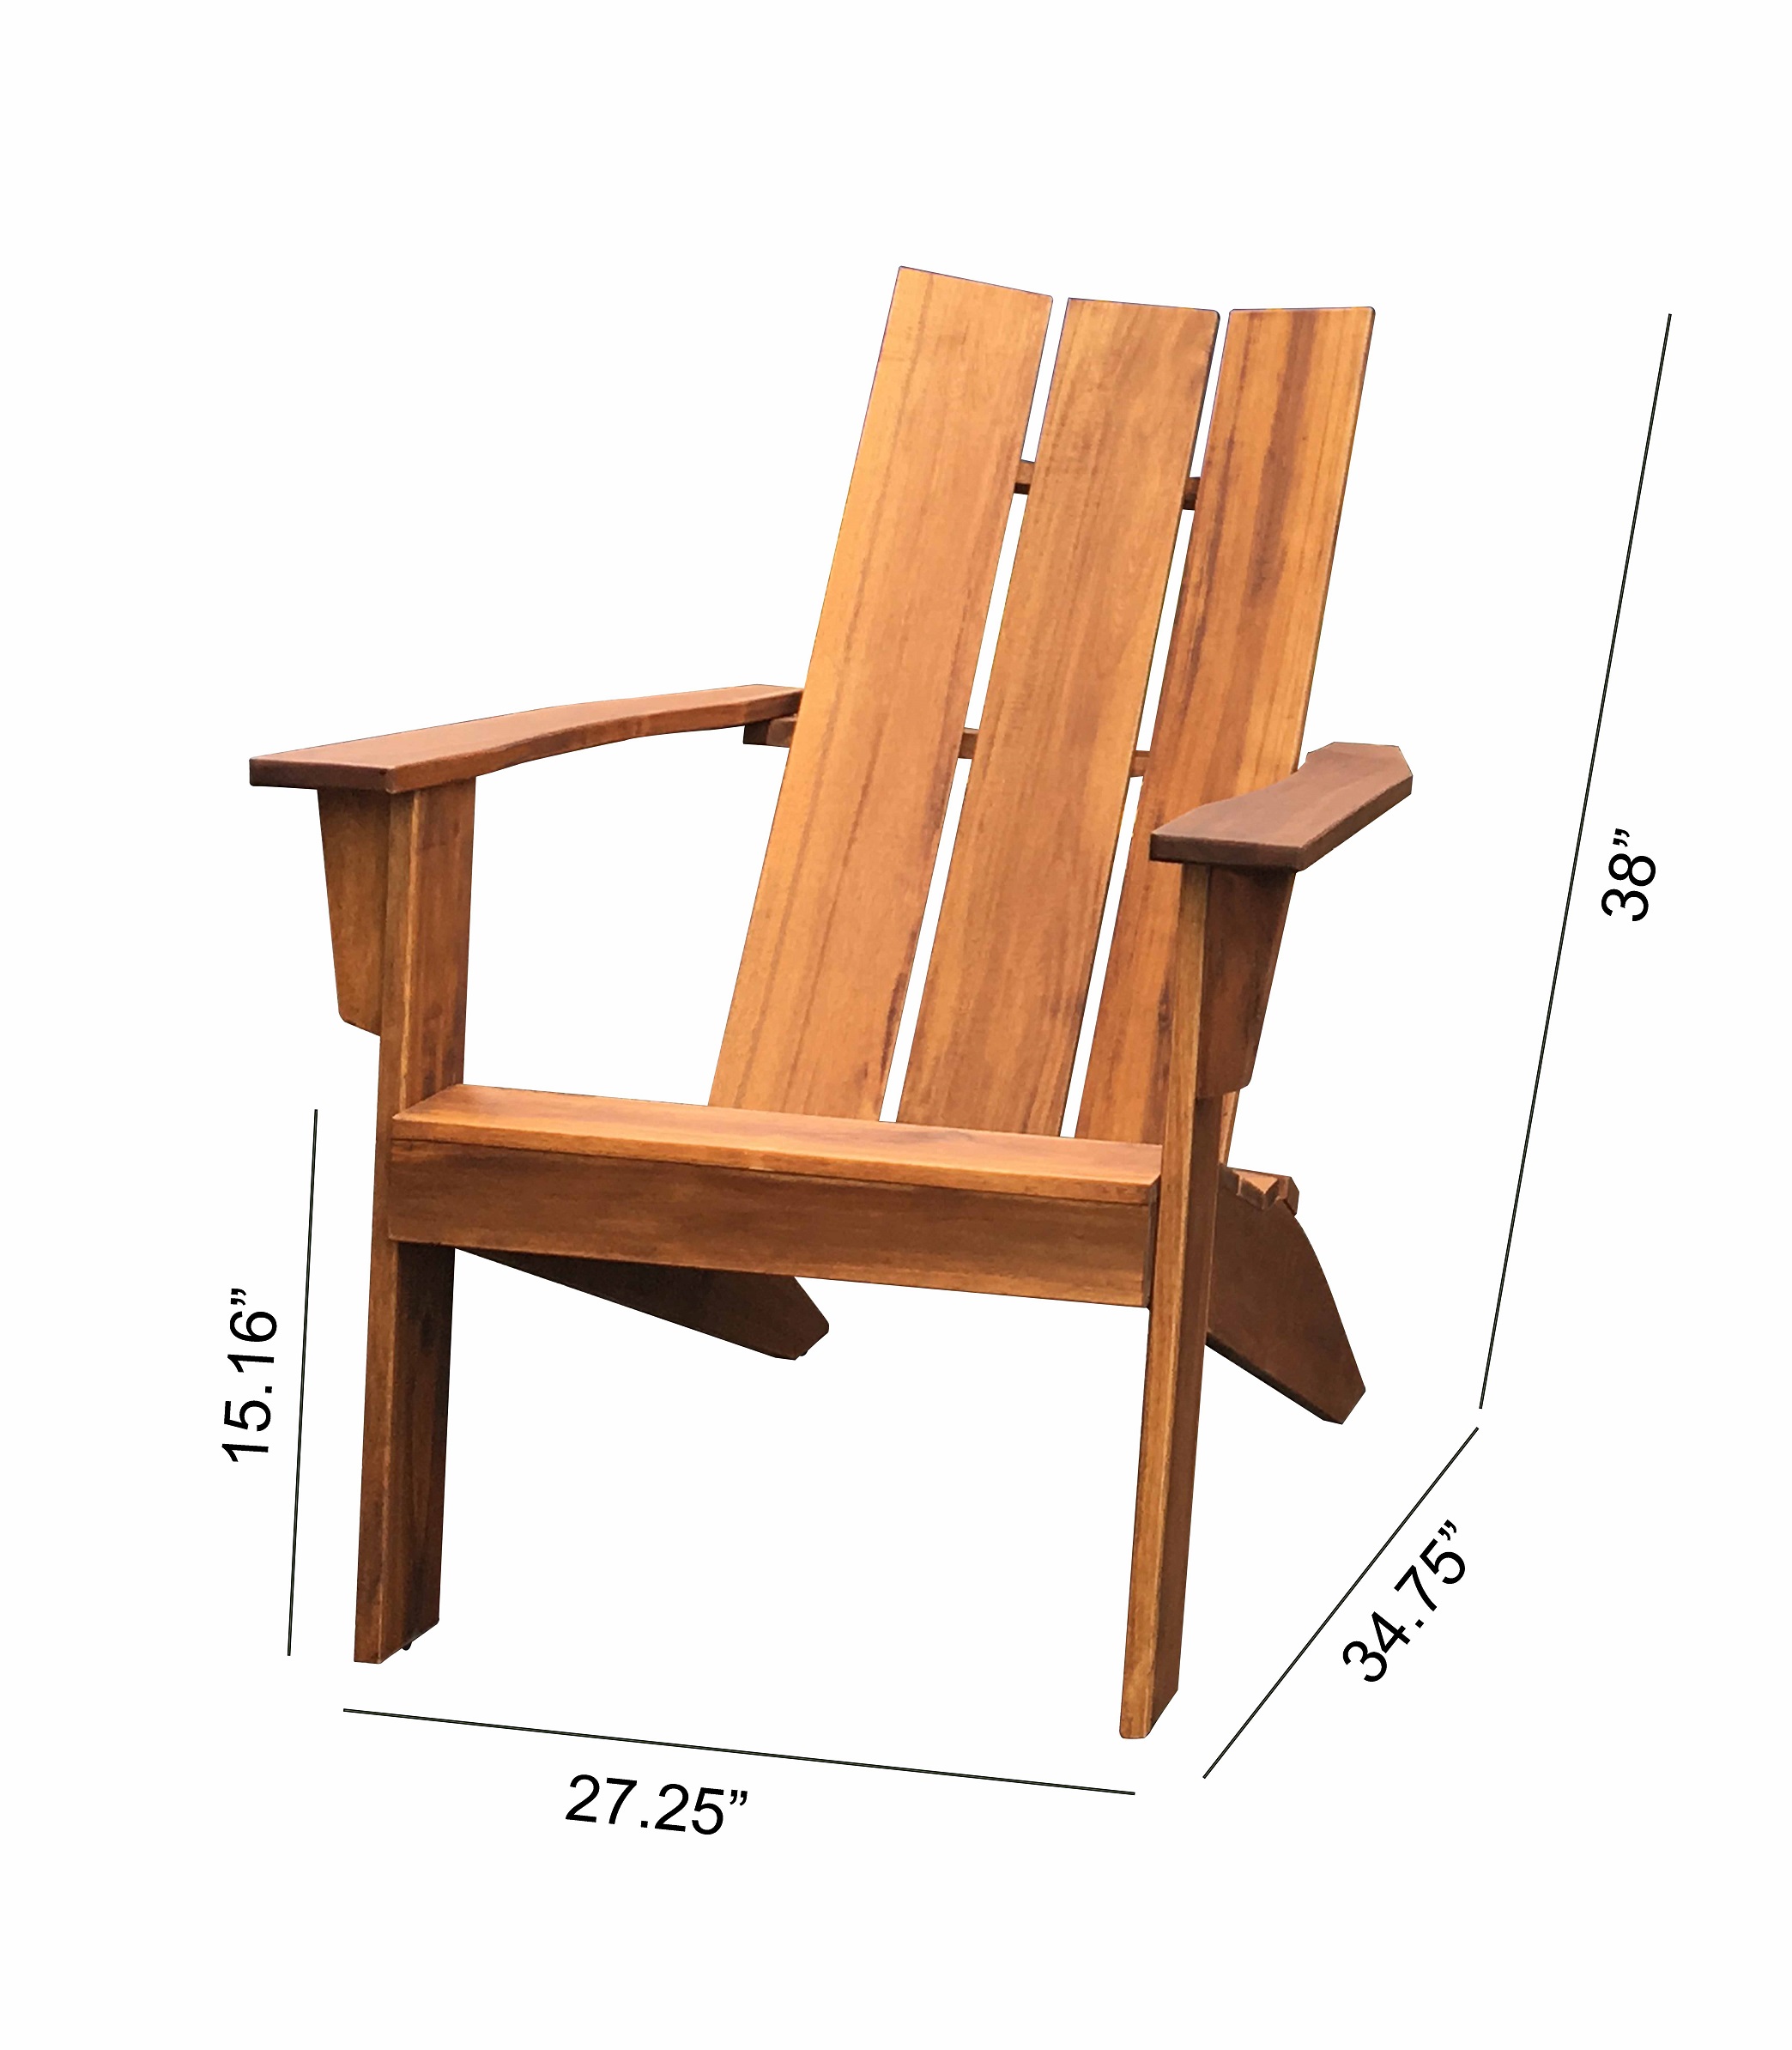 Mainstays Wood Outdoor Modern Adirondack Chair, Natural Color - image 2 of 9